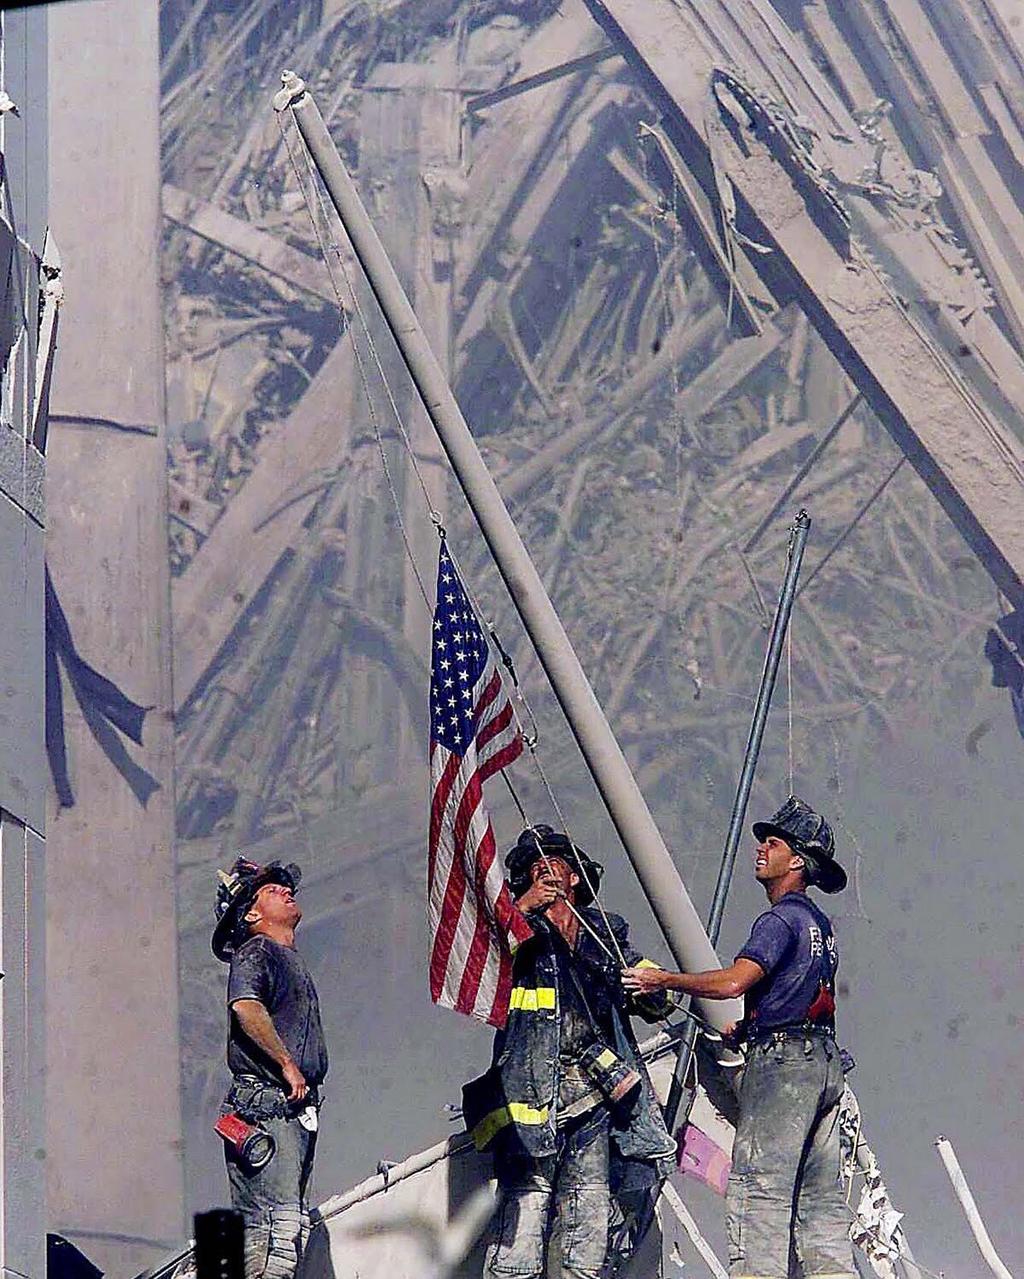 Russell Wilson @DangeRussWilson We will always remember, honor, and love those we lost..15 years ago still feels like yesterday. 9/11.